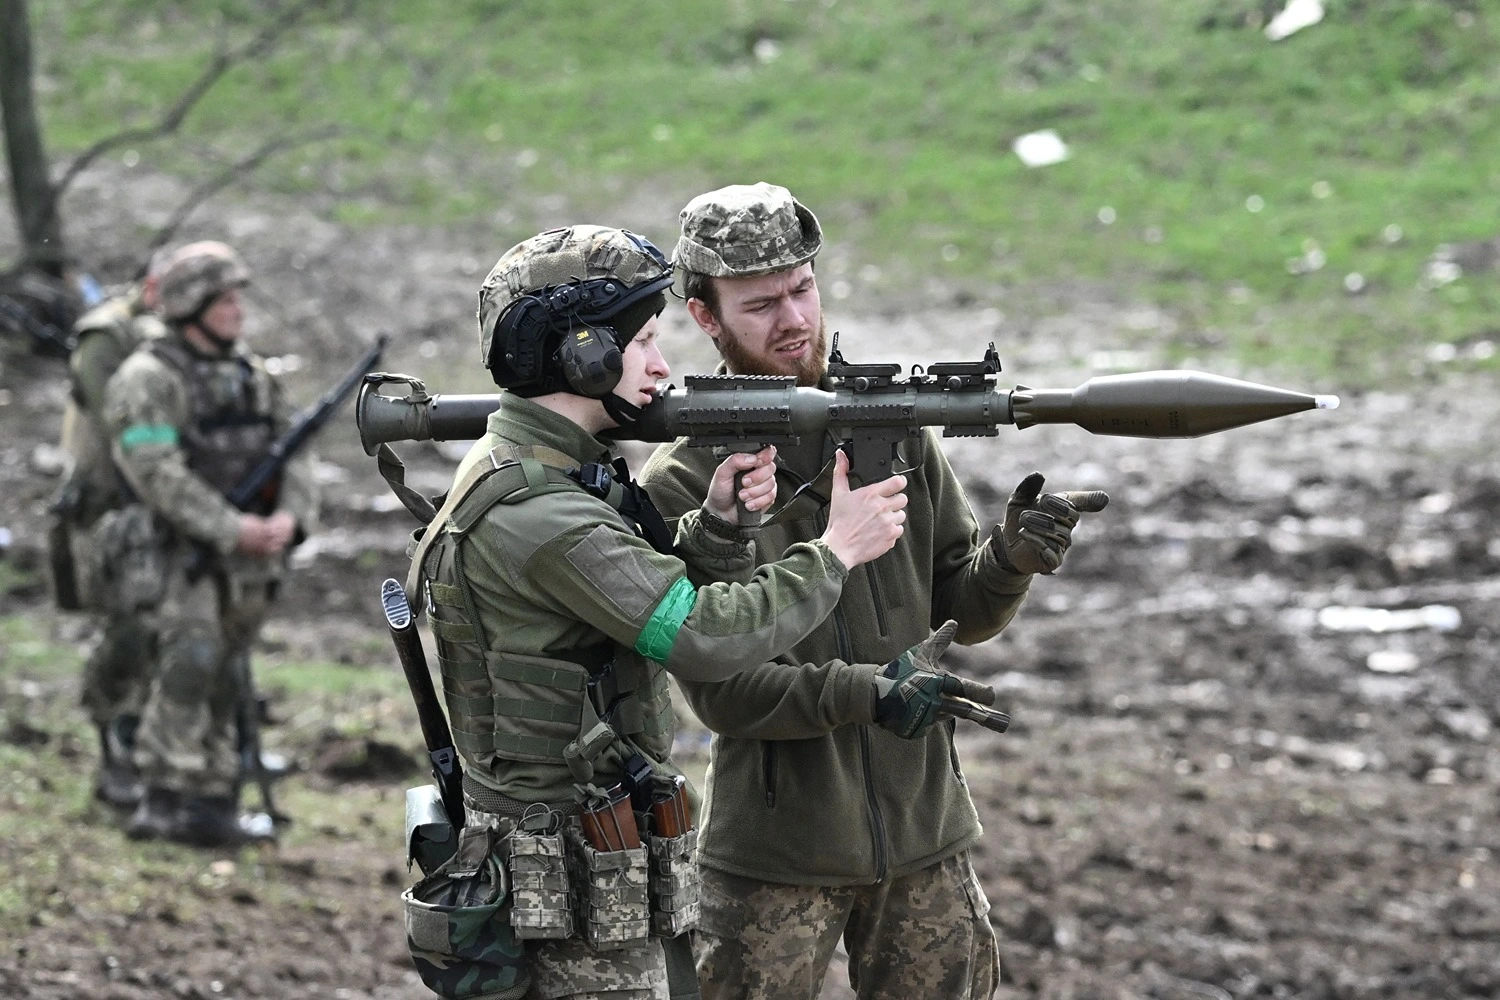 Ukraine's Spring Counteroffensive Against Russian Forces: Plans Remain Classified